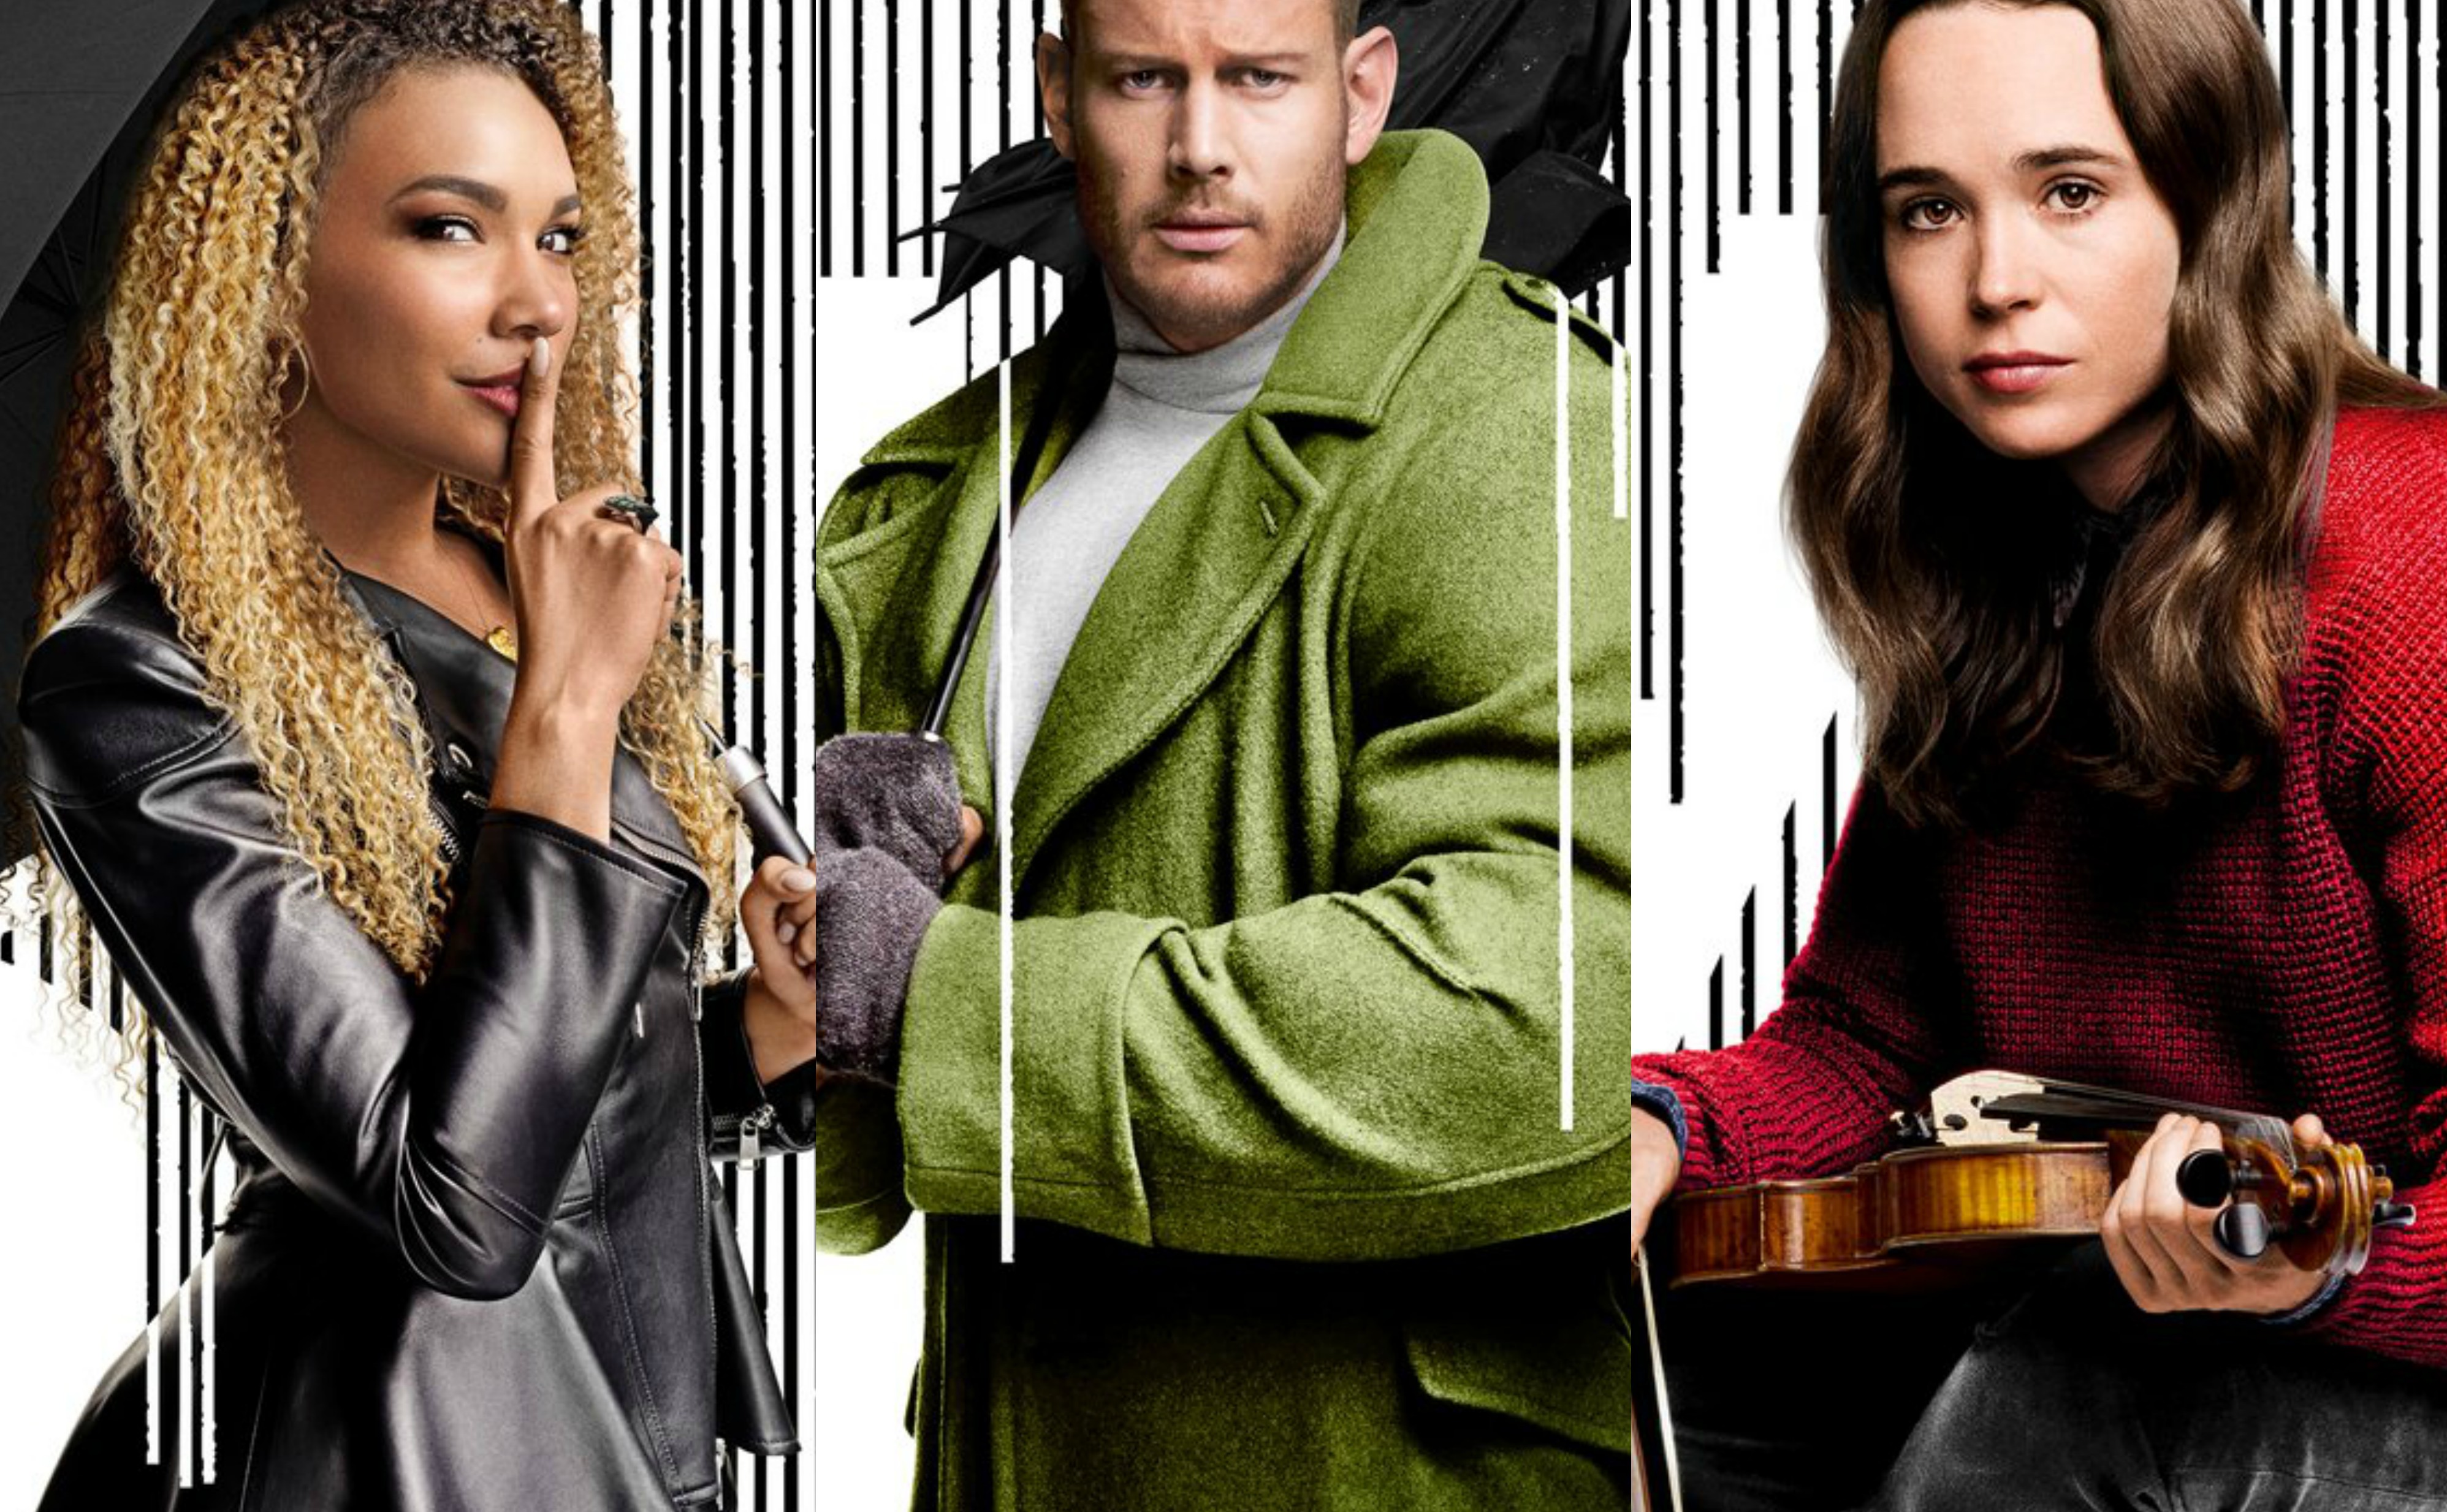 Netflix's Umbrella Academy Posters Reveal The Family